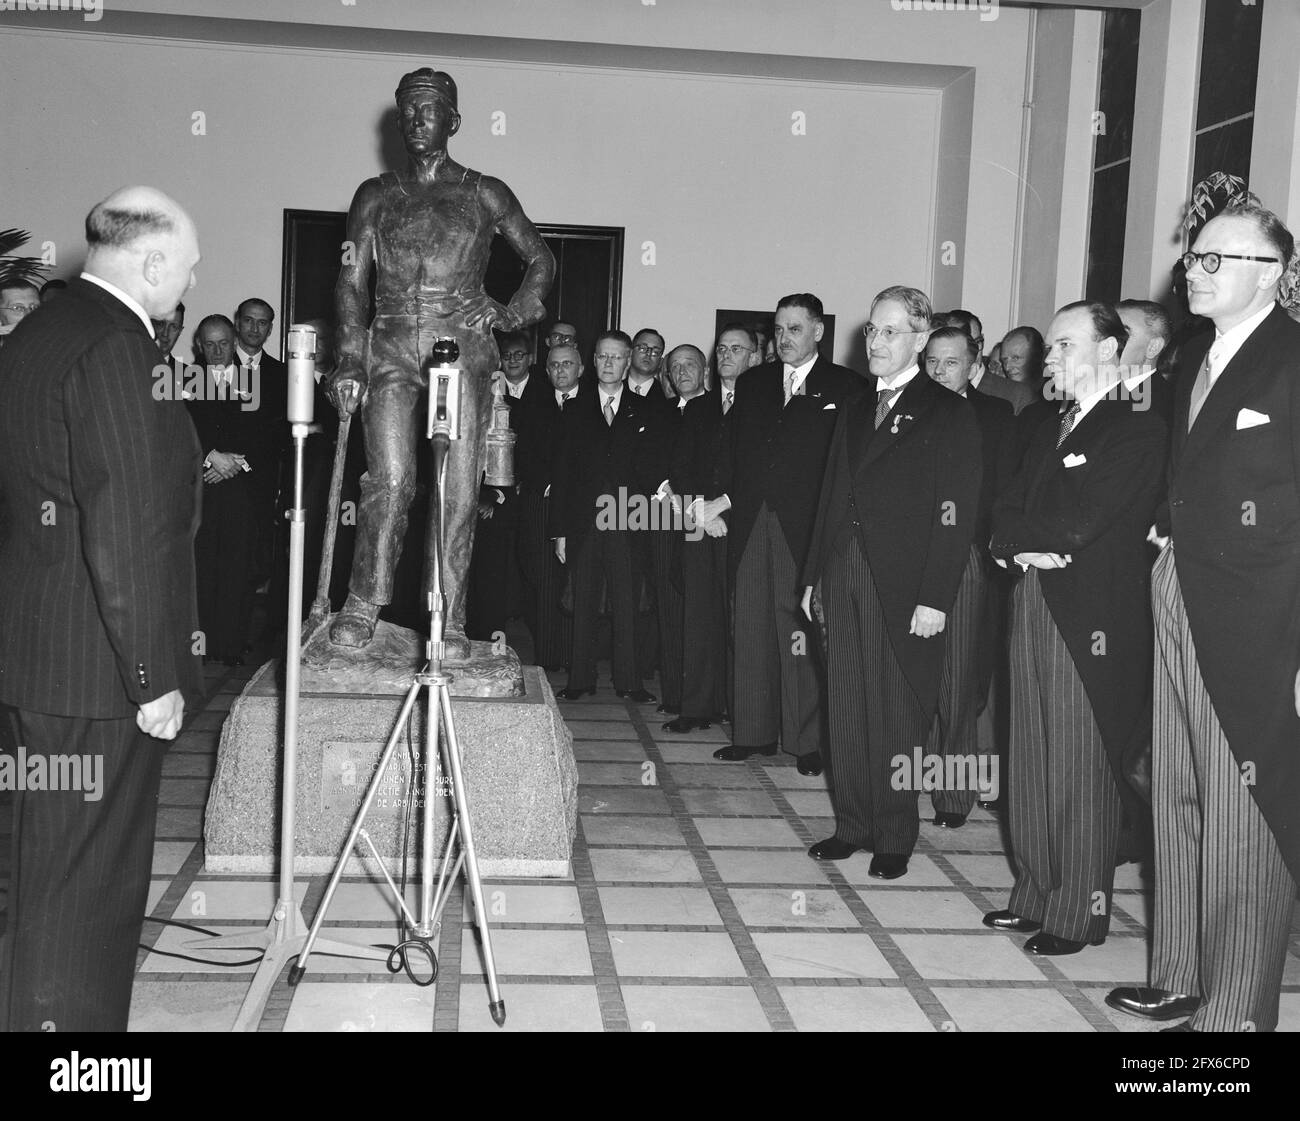 The Golden Jubilee of the State Mines in Limburg. A statue, representing a miner, was offered by the mining personnel. The unveiling of the statue made by the sculptor Melis. On the right, Dr. Ch. Th. Groothoff (President), May 8, 1952, STAATSMIJNEN (State mines), offers, anniversary, The Netherlands, 20th century press agency photo, news to remember, documentary, historic photography 1945-1990, visual stories, human history of the Twentieth Century, capturing moments in time Stock Photo